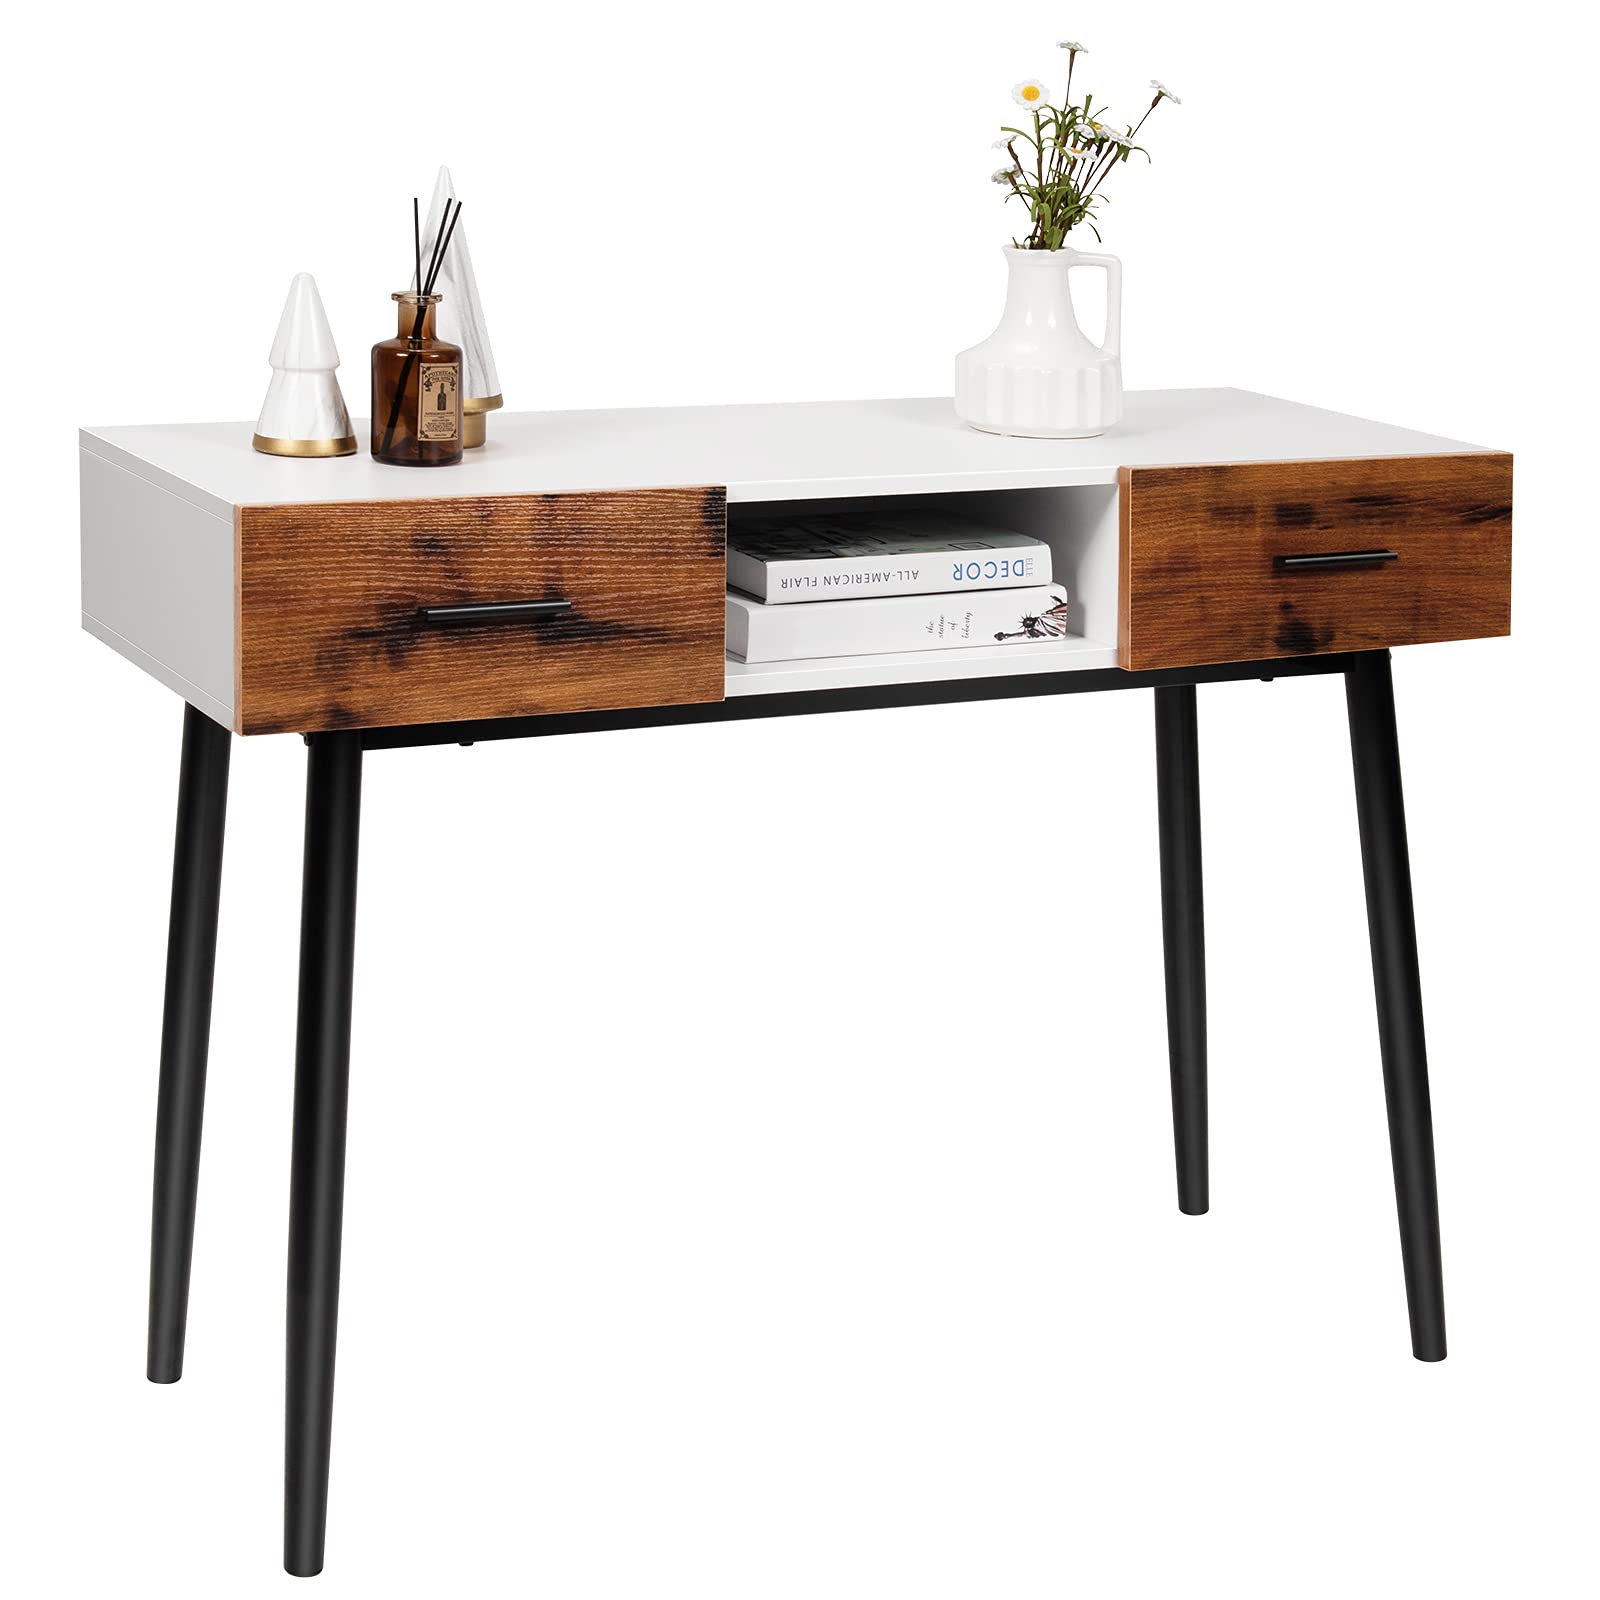 Giantex 48" Console Table, Industrial Style Sofa Table w/ 2 Drawers & Middle Open Shelf